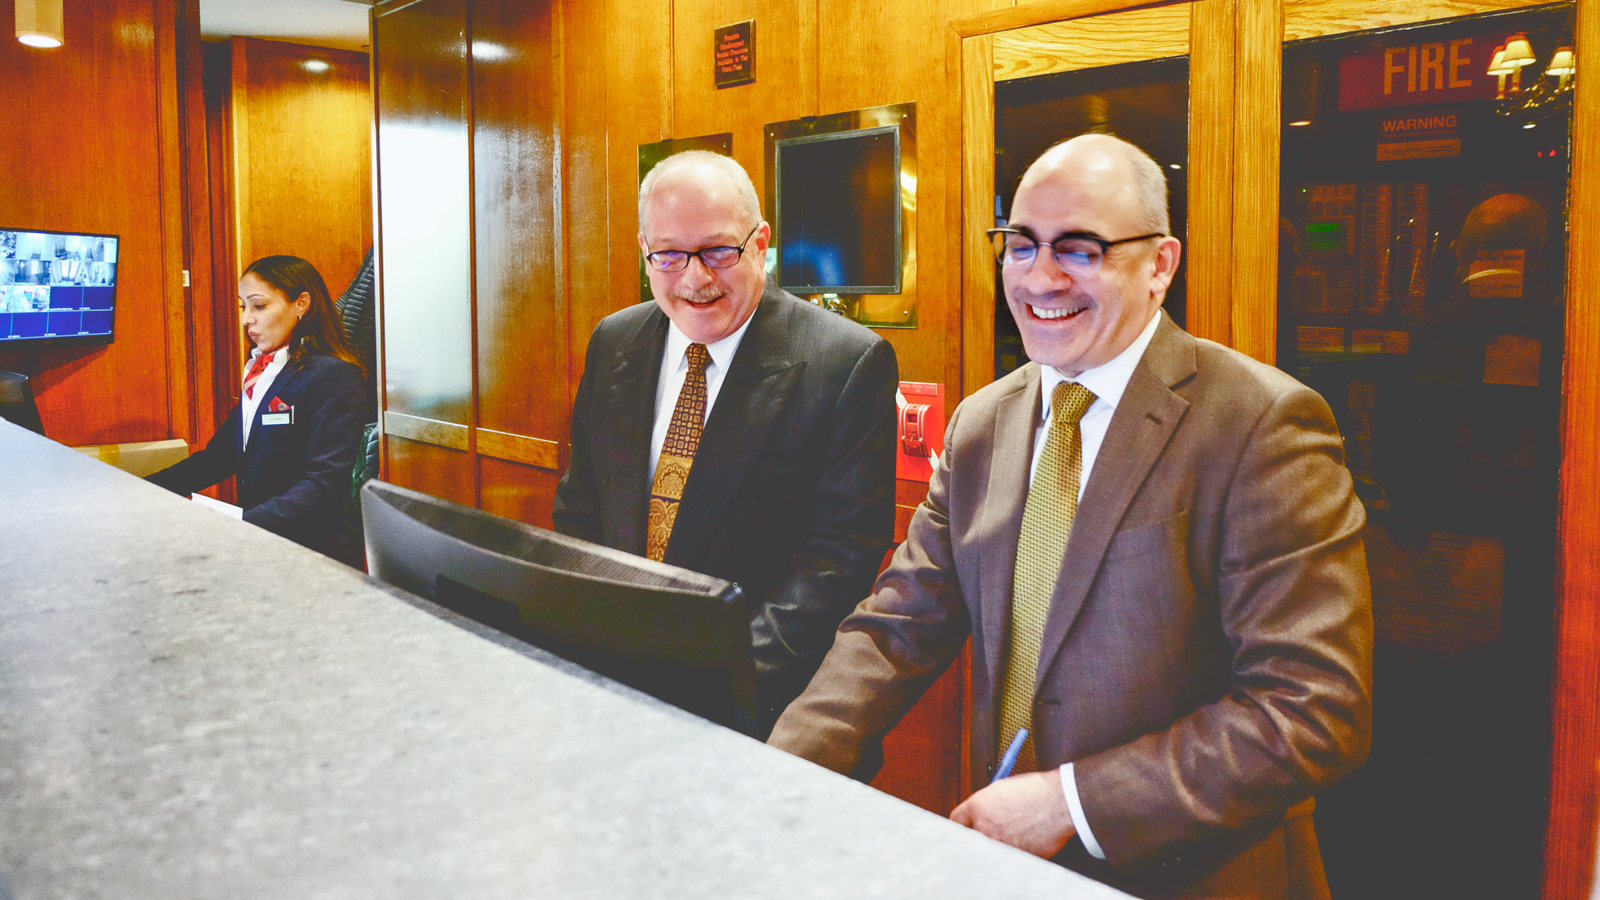 Craig Lasnier lends a hand behind the front desk of the Cornell Club